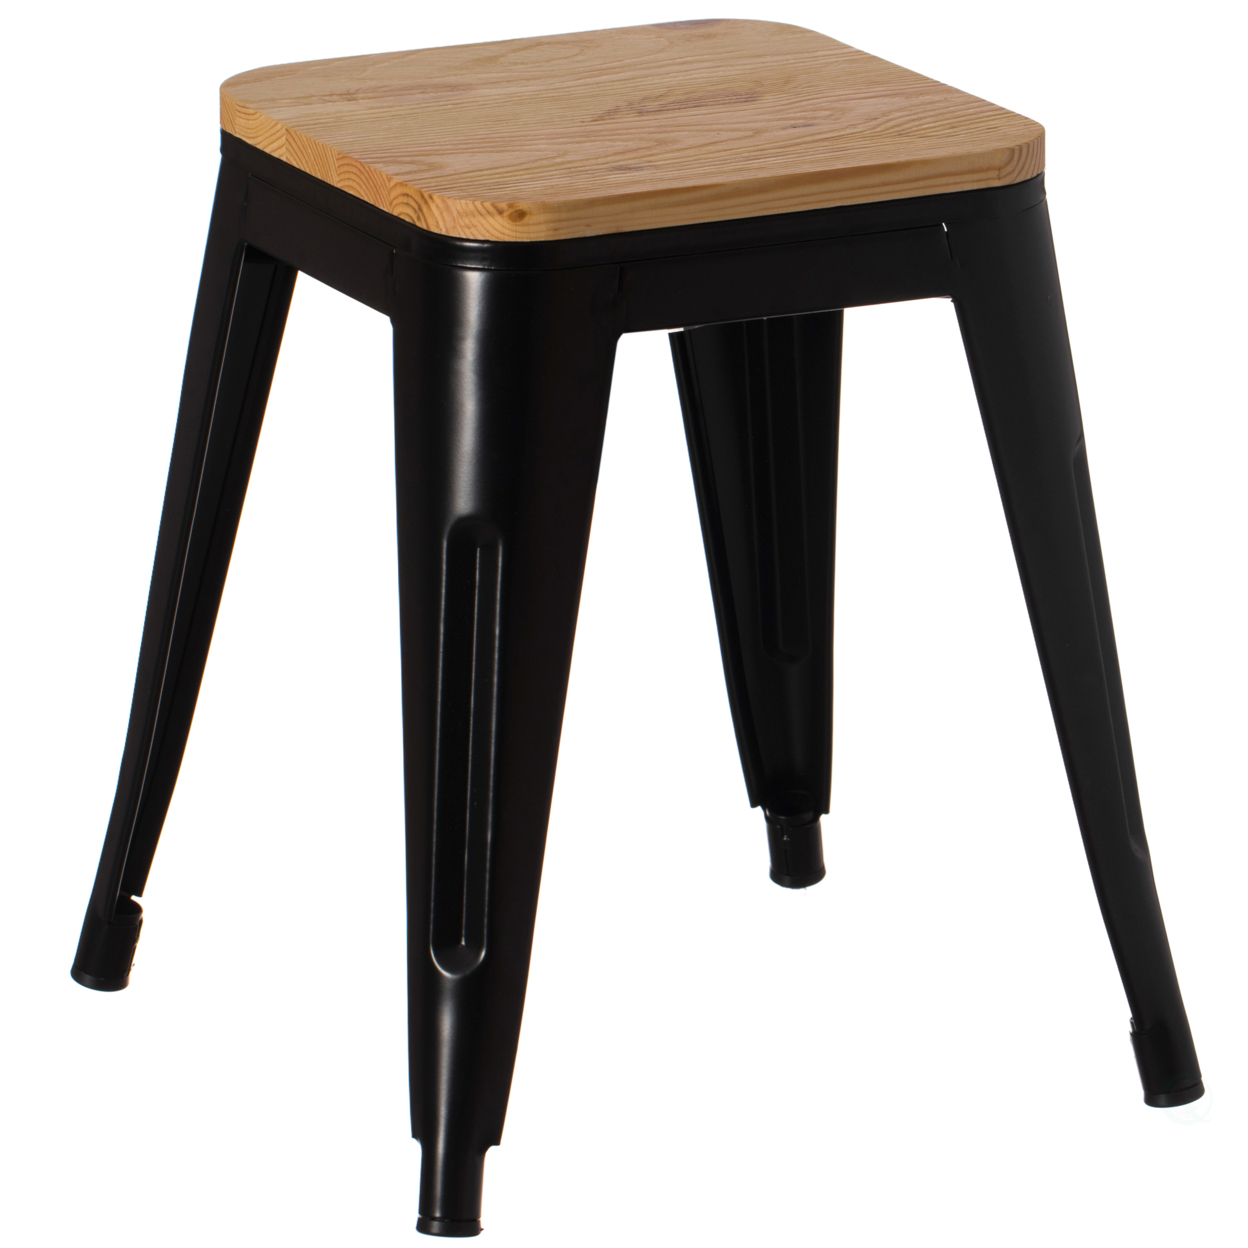 Decorative Accent Bar Stool For Indoor And Outdoor, Wooden Brown And Metal Black - Medium